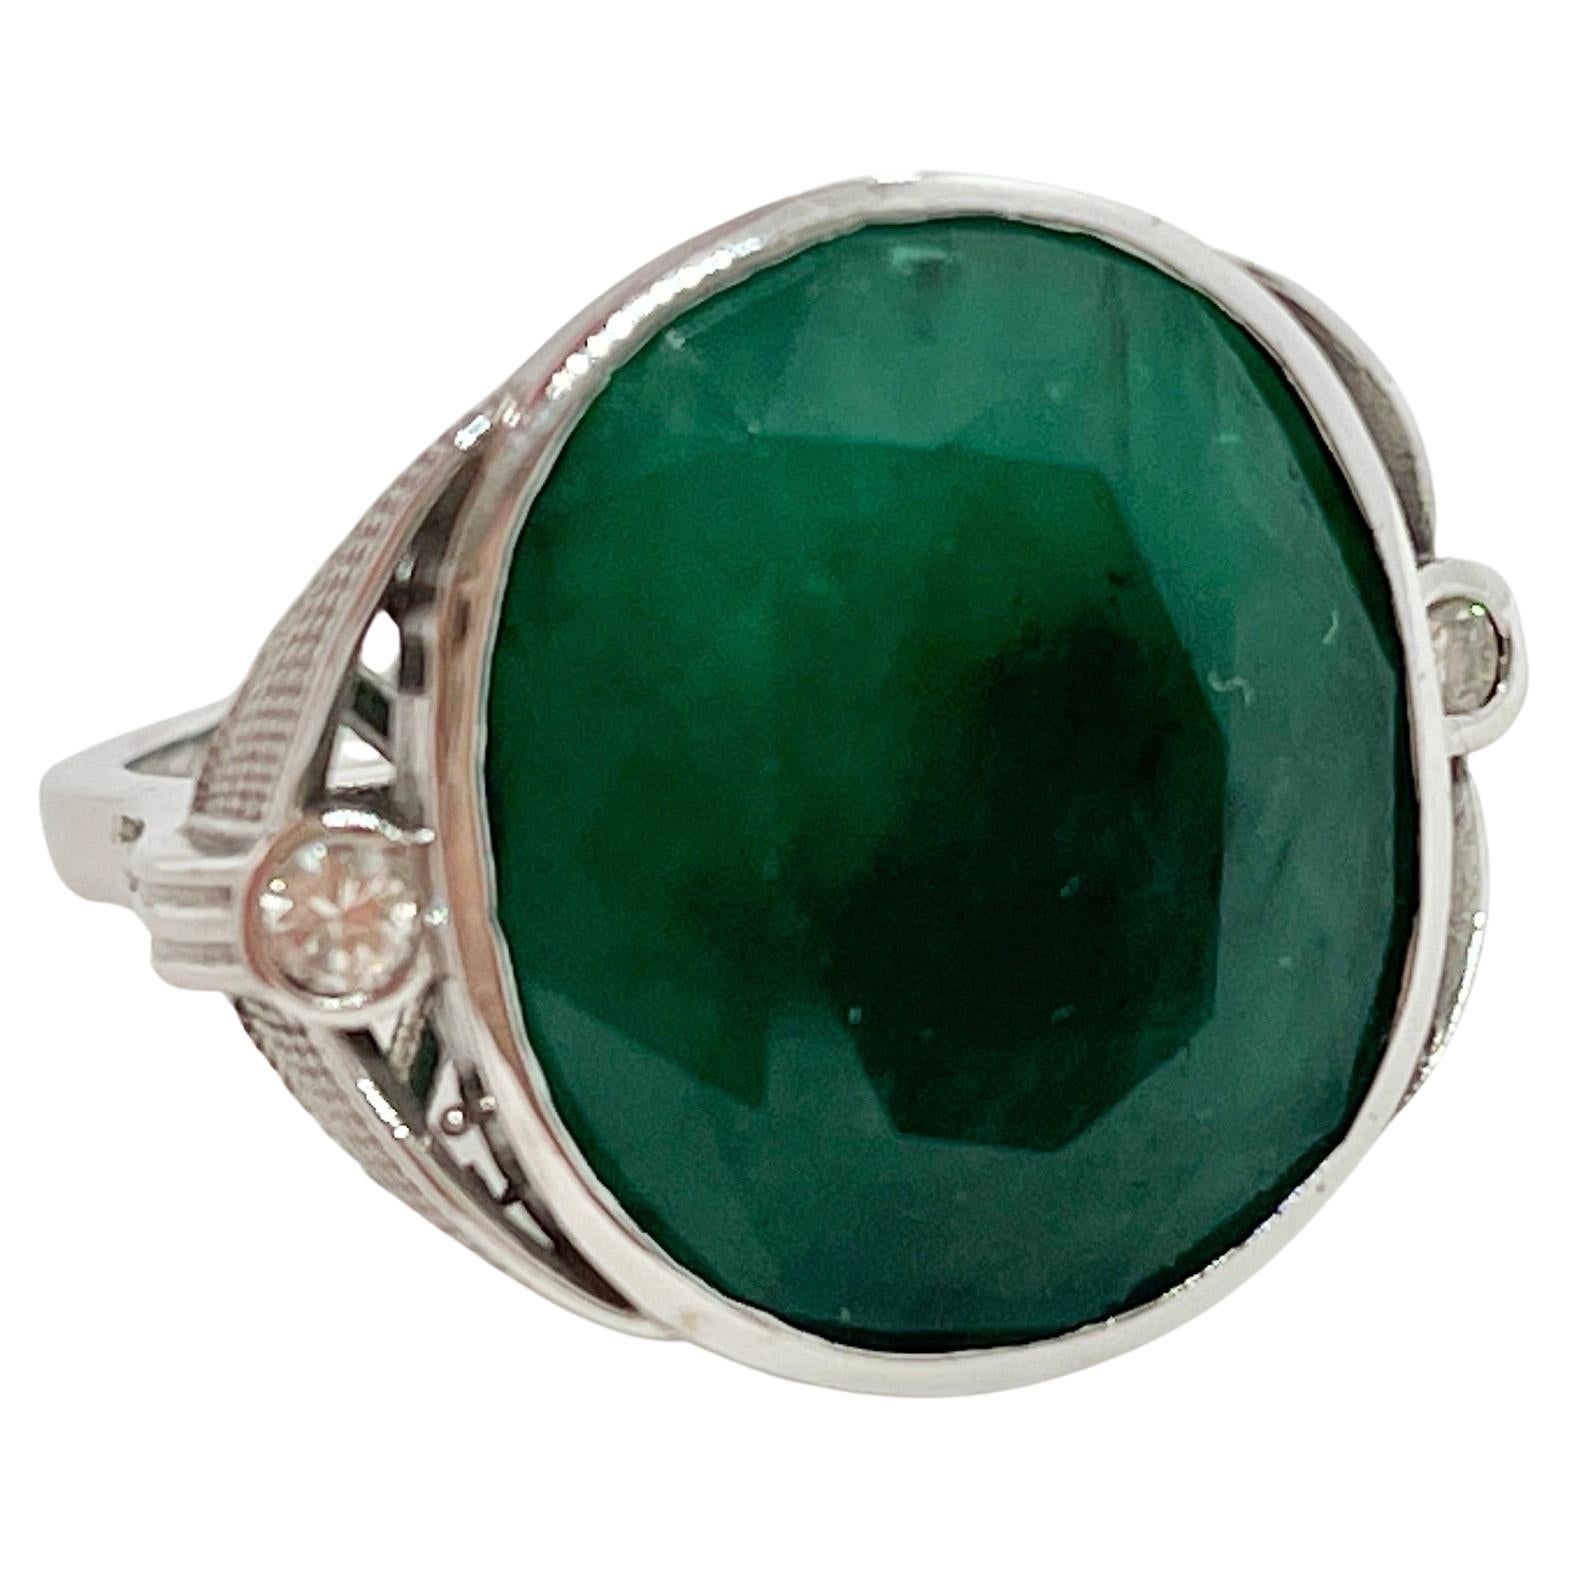 Amazing Huge 20CT Natural Emerald Diamond Ring 9ct White Gold with Valuation For Sale